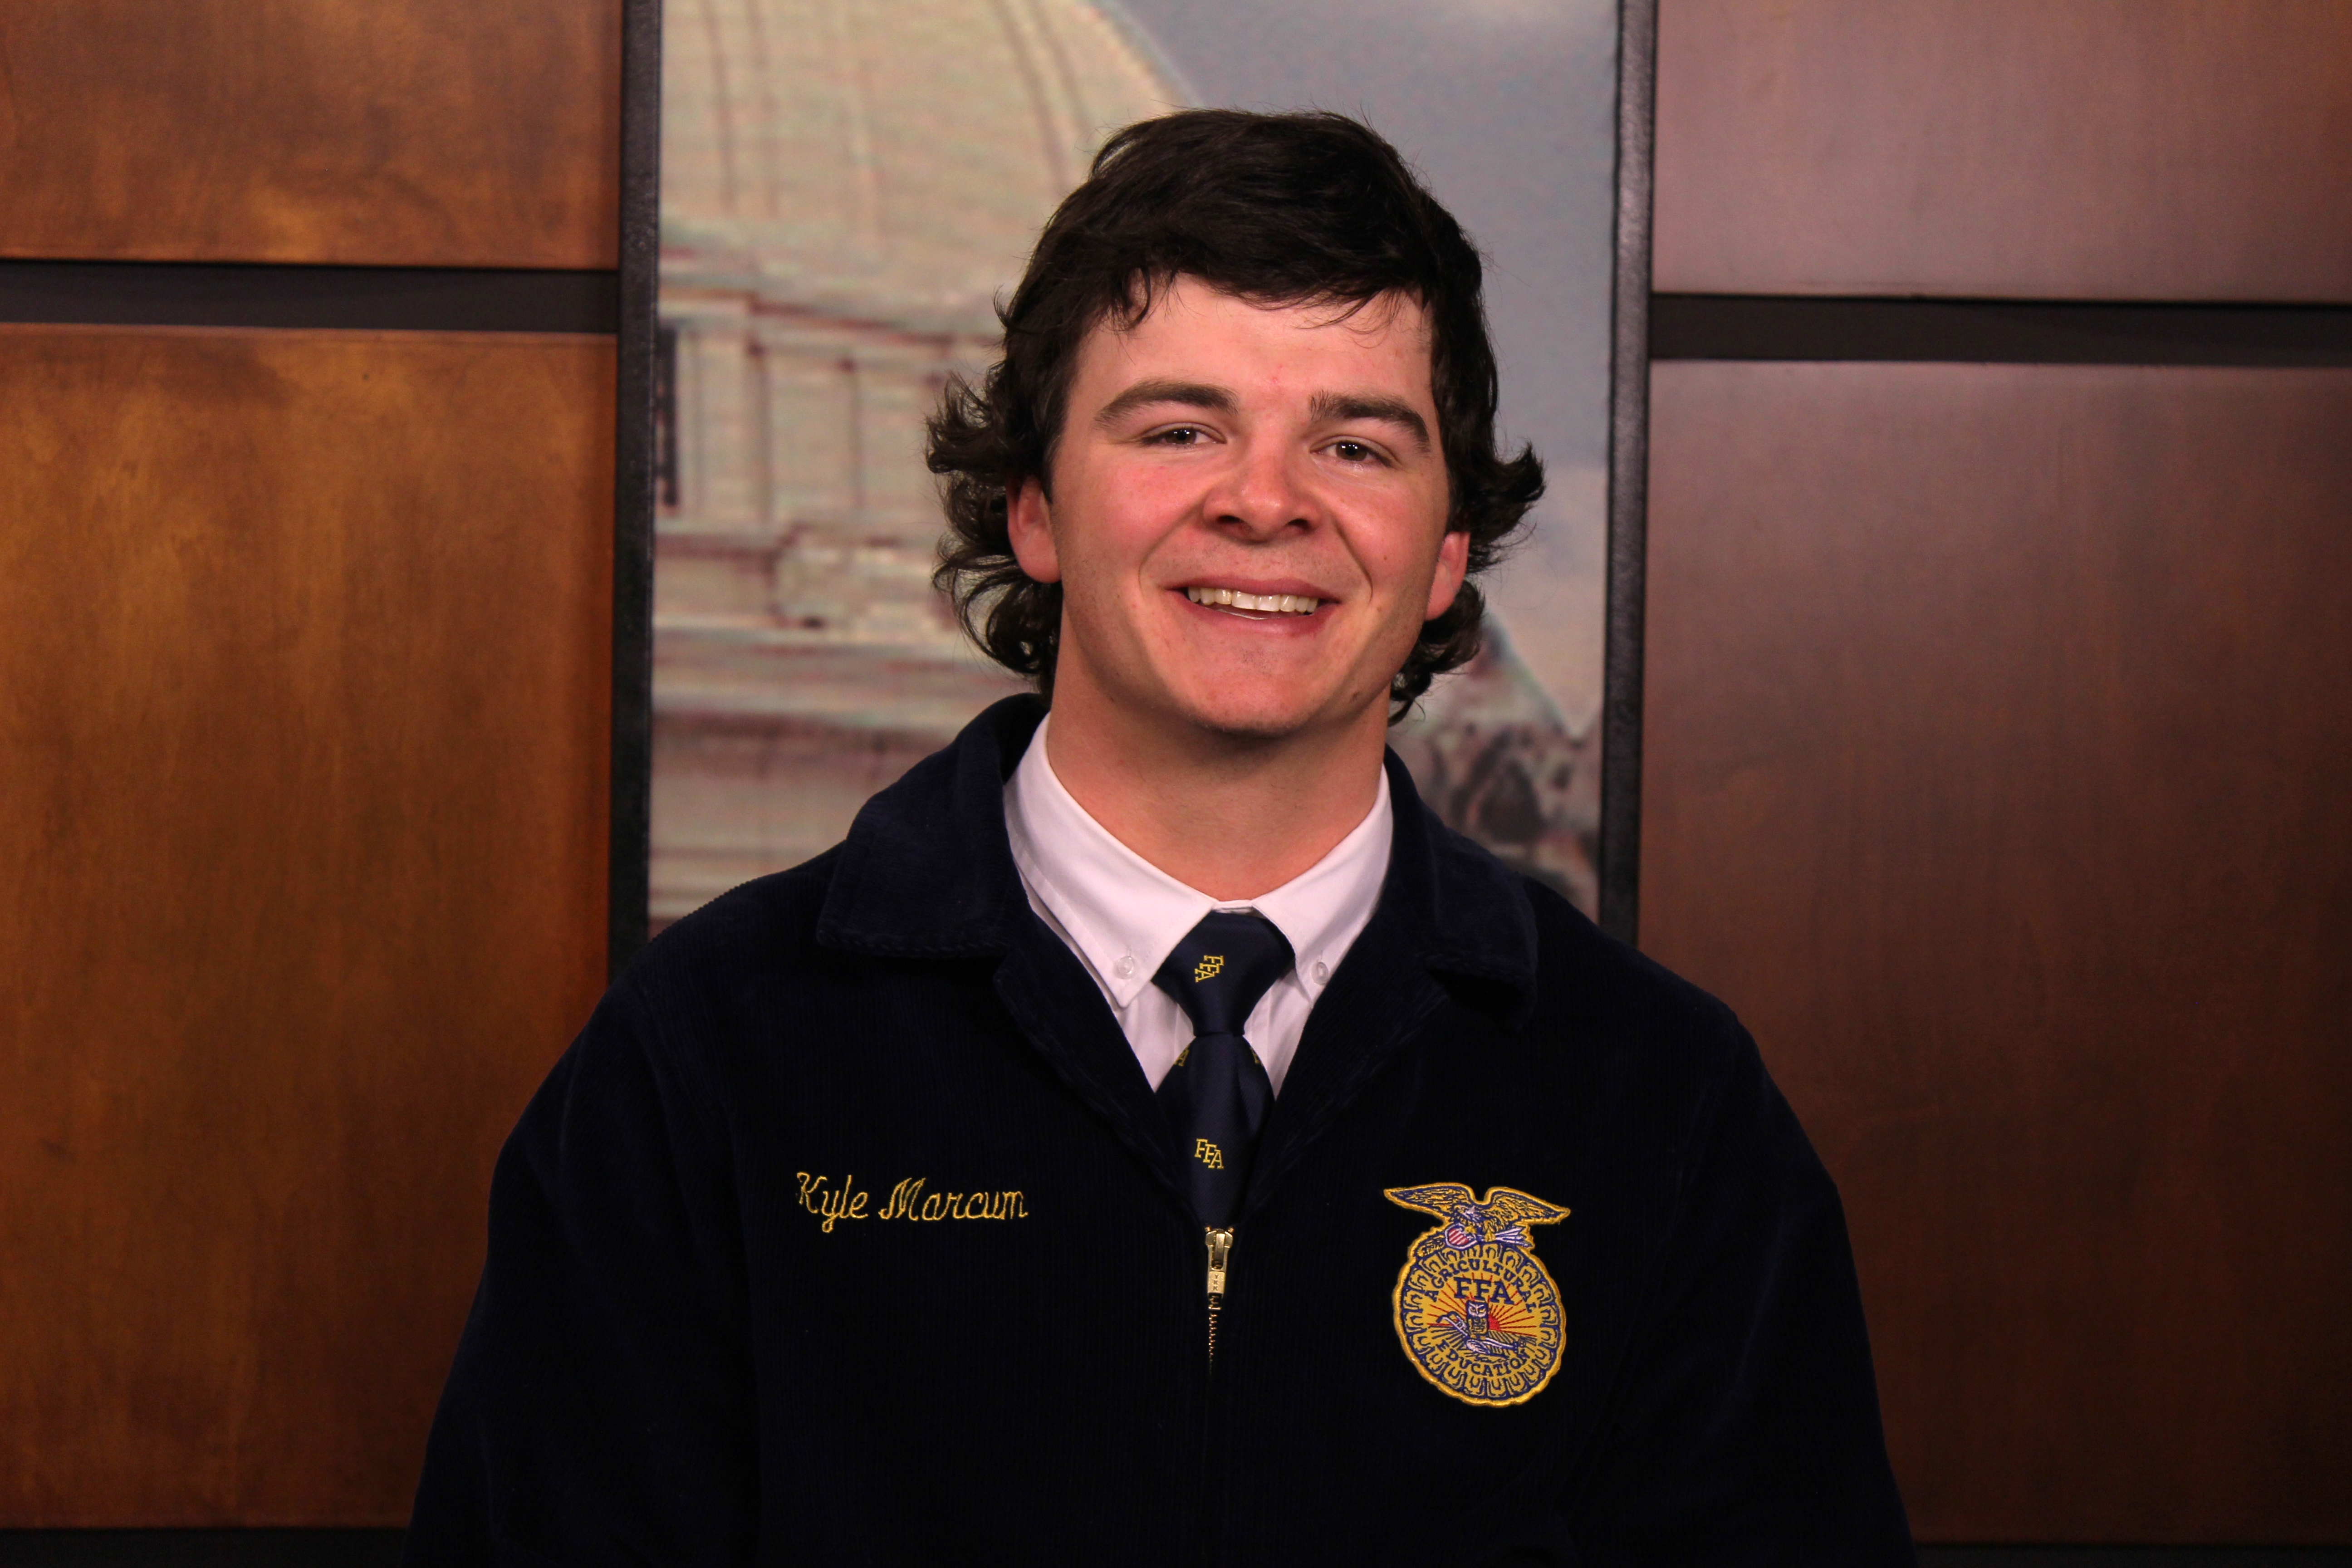 Introducing Kyle Marcum of the Lindsay FFA Chapter, Your 2022 Central Area Star in Agricultural Placement